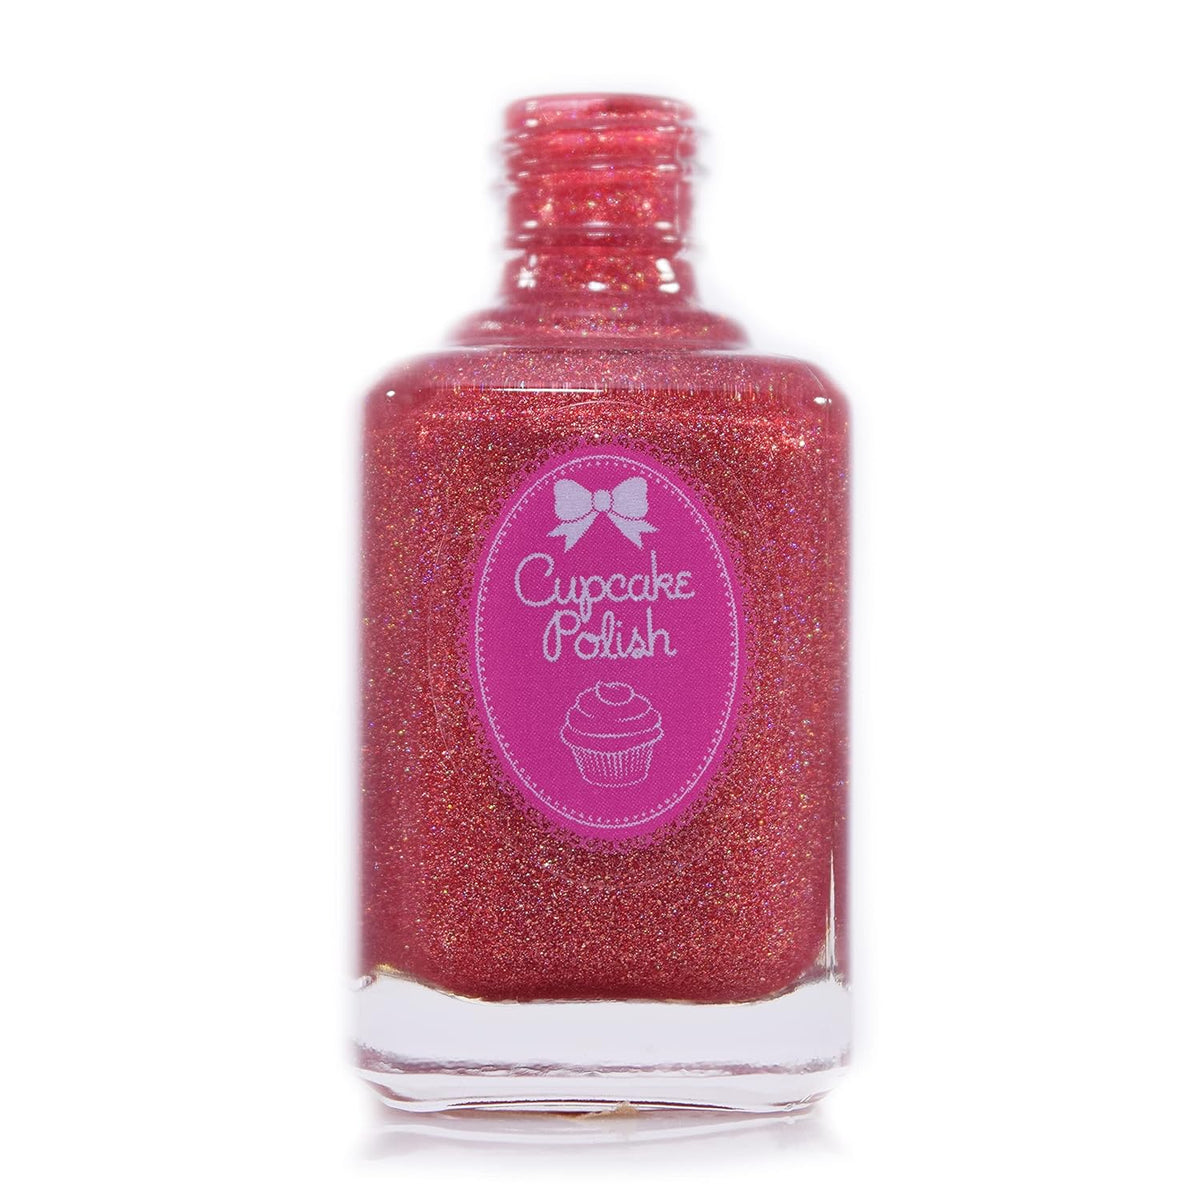 Apple-y Ever After - red holographic nail polish by Cupcake Polish